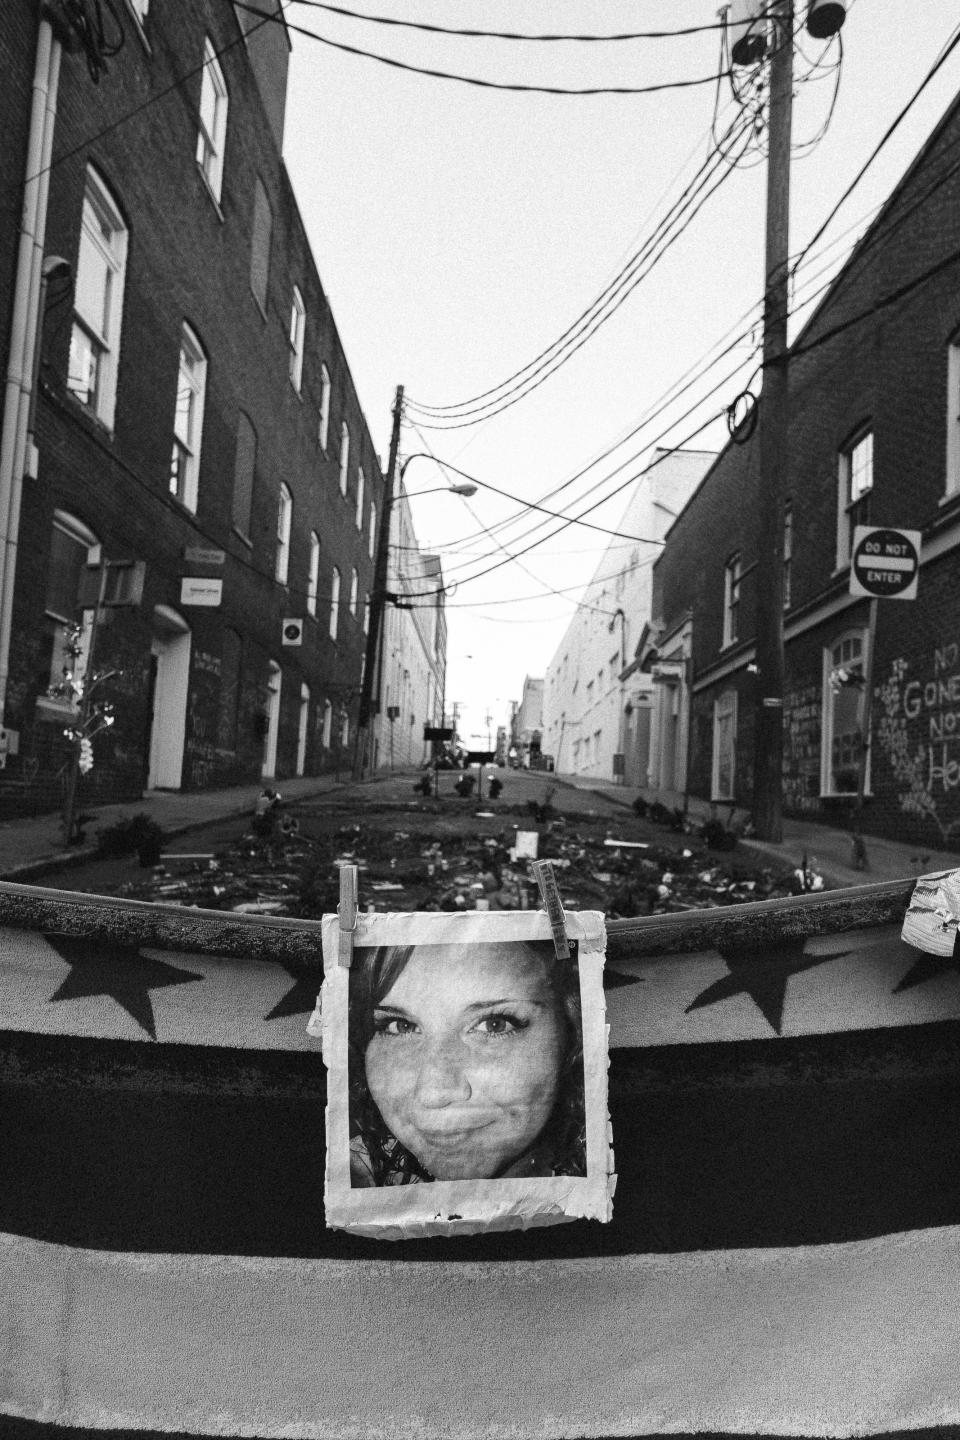 A photo of a memorial to Heather Heyer. (Photo: Eze Amos)